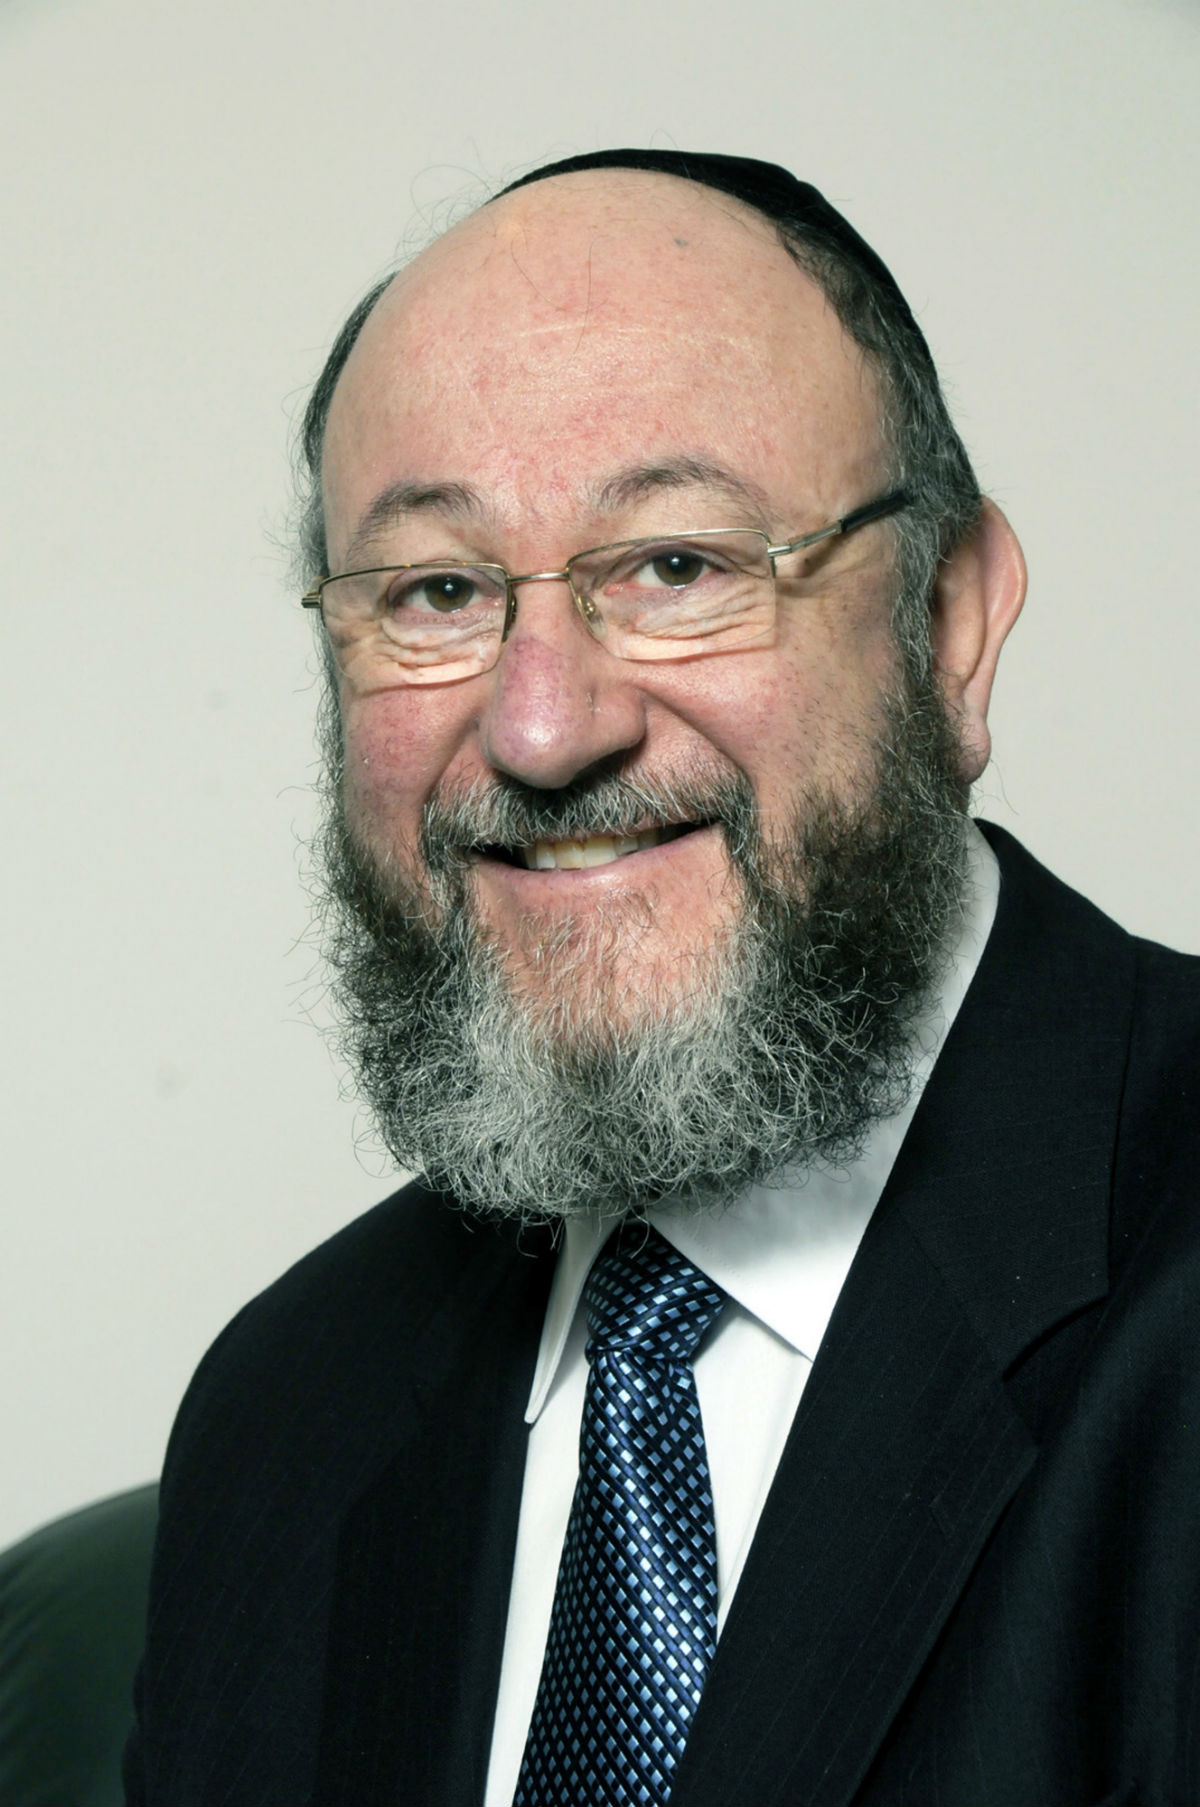 Rabbi Ephraim Mirvis, the Chief Rabbi of the United Hebrew Congregations of the Commonwealth of the United Kingdom.